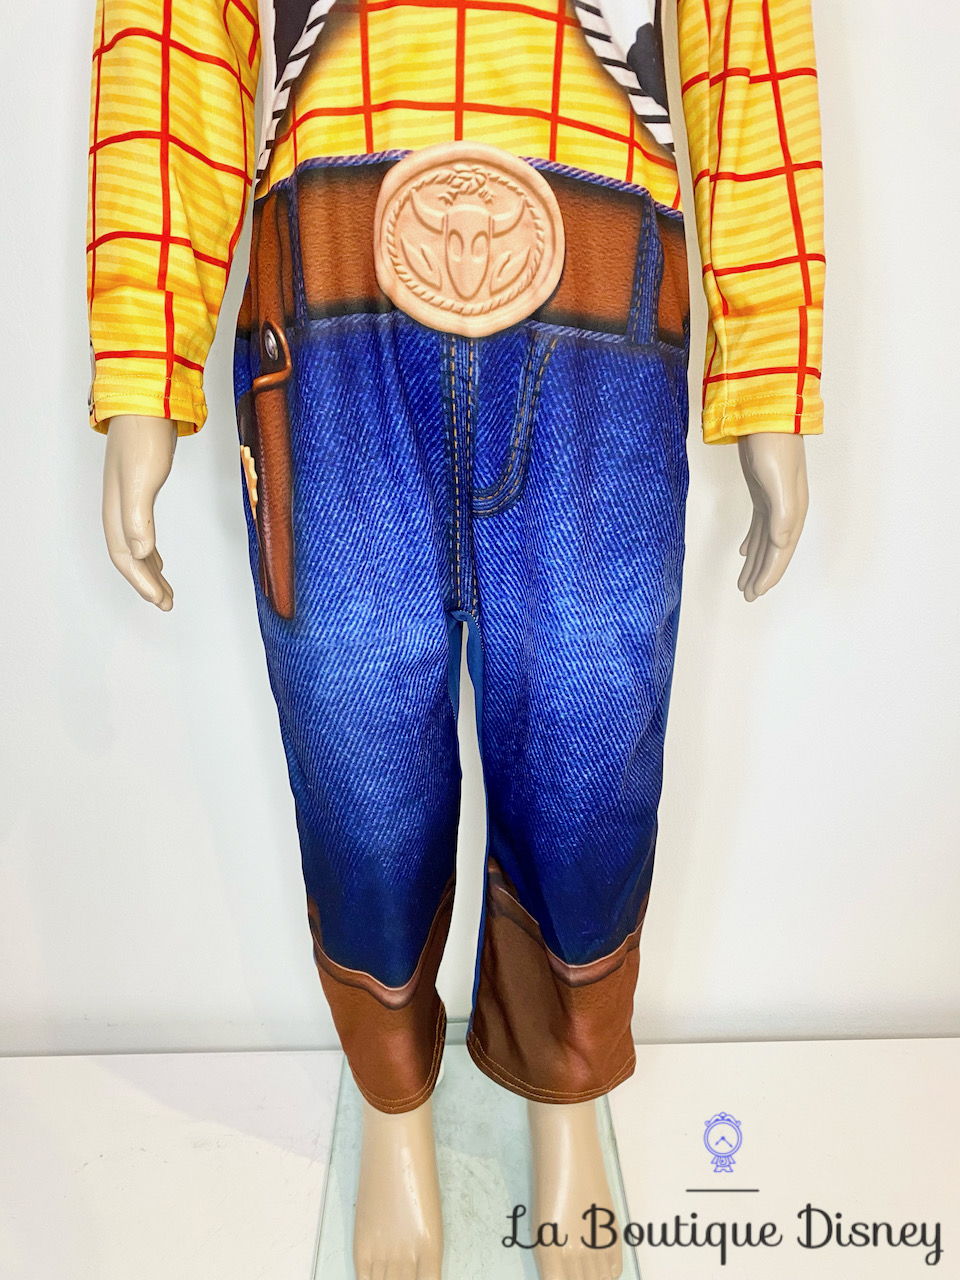 déguisement-woody-toy-story-disney-rubies-taille-3-4-ans-cow-boy-masque-16